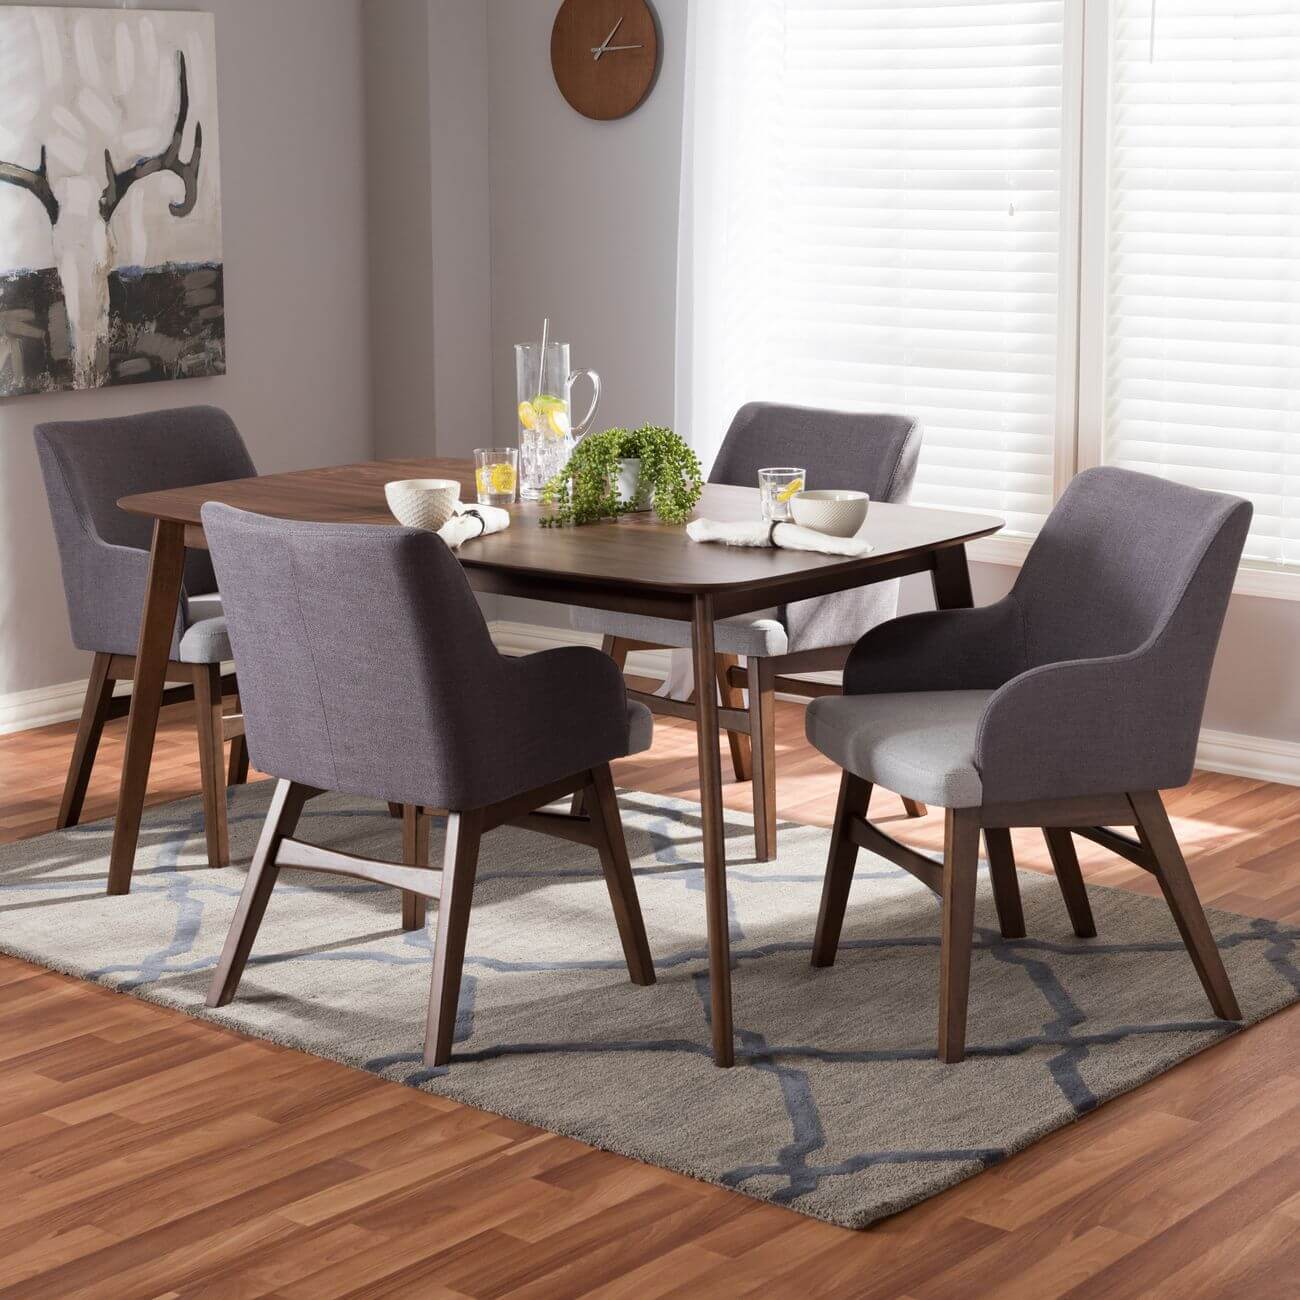 Why Your Home Needs a Mid Century Modern Dining Table